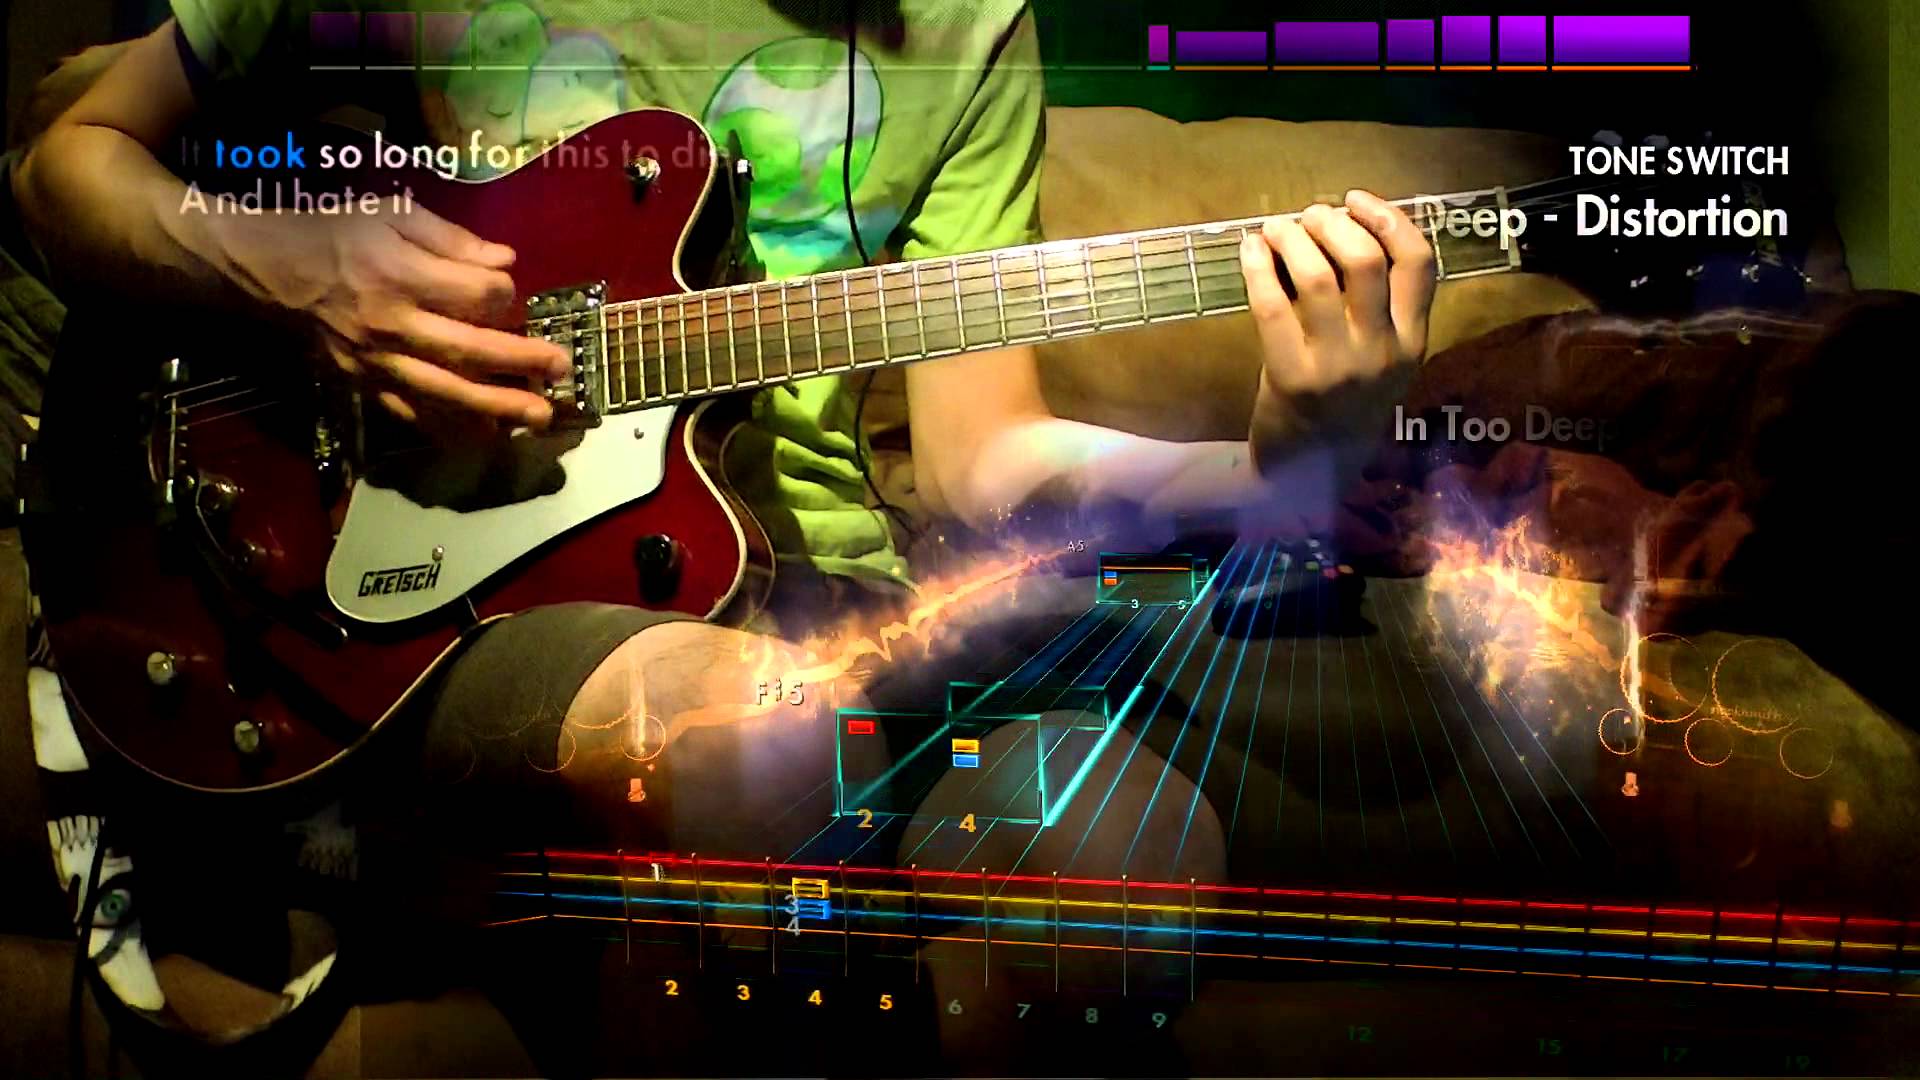 download rocksmith 2014 for mac